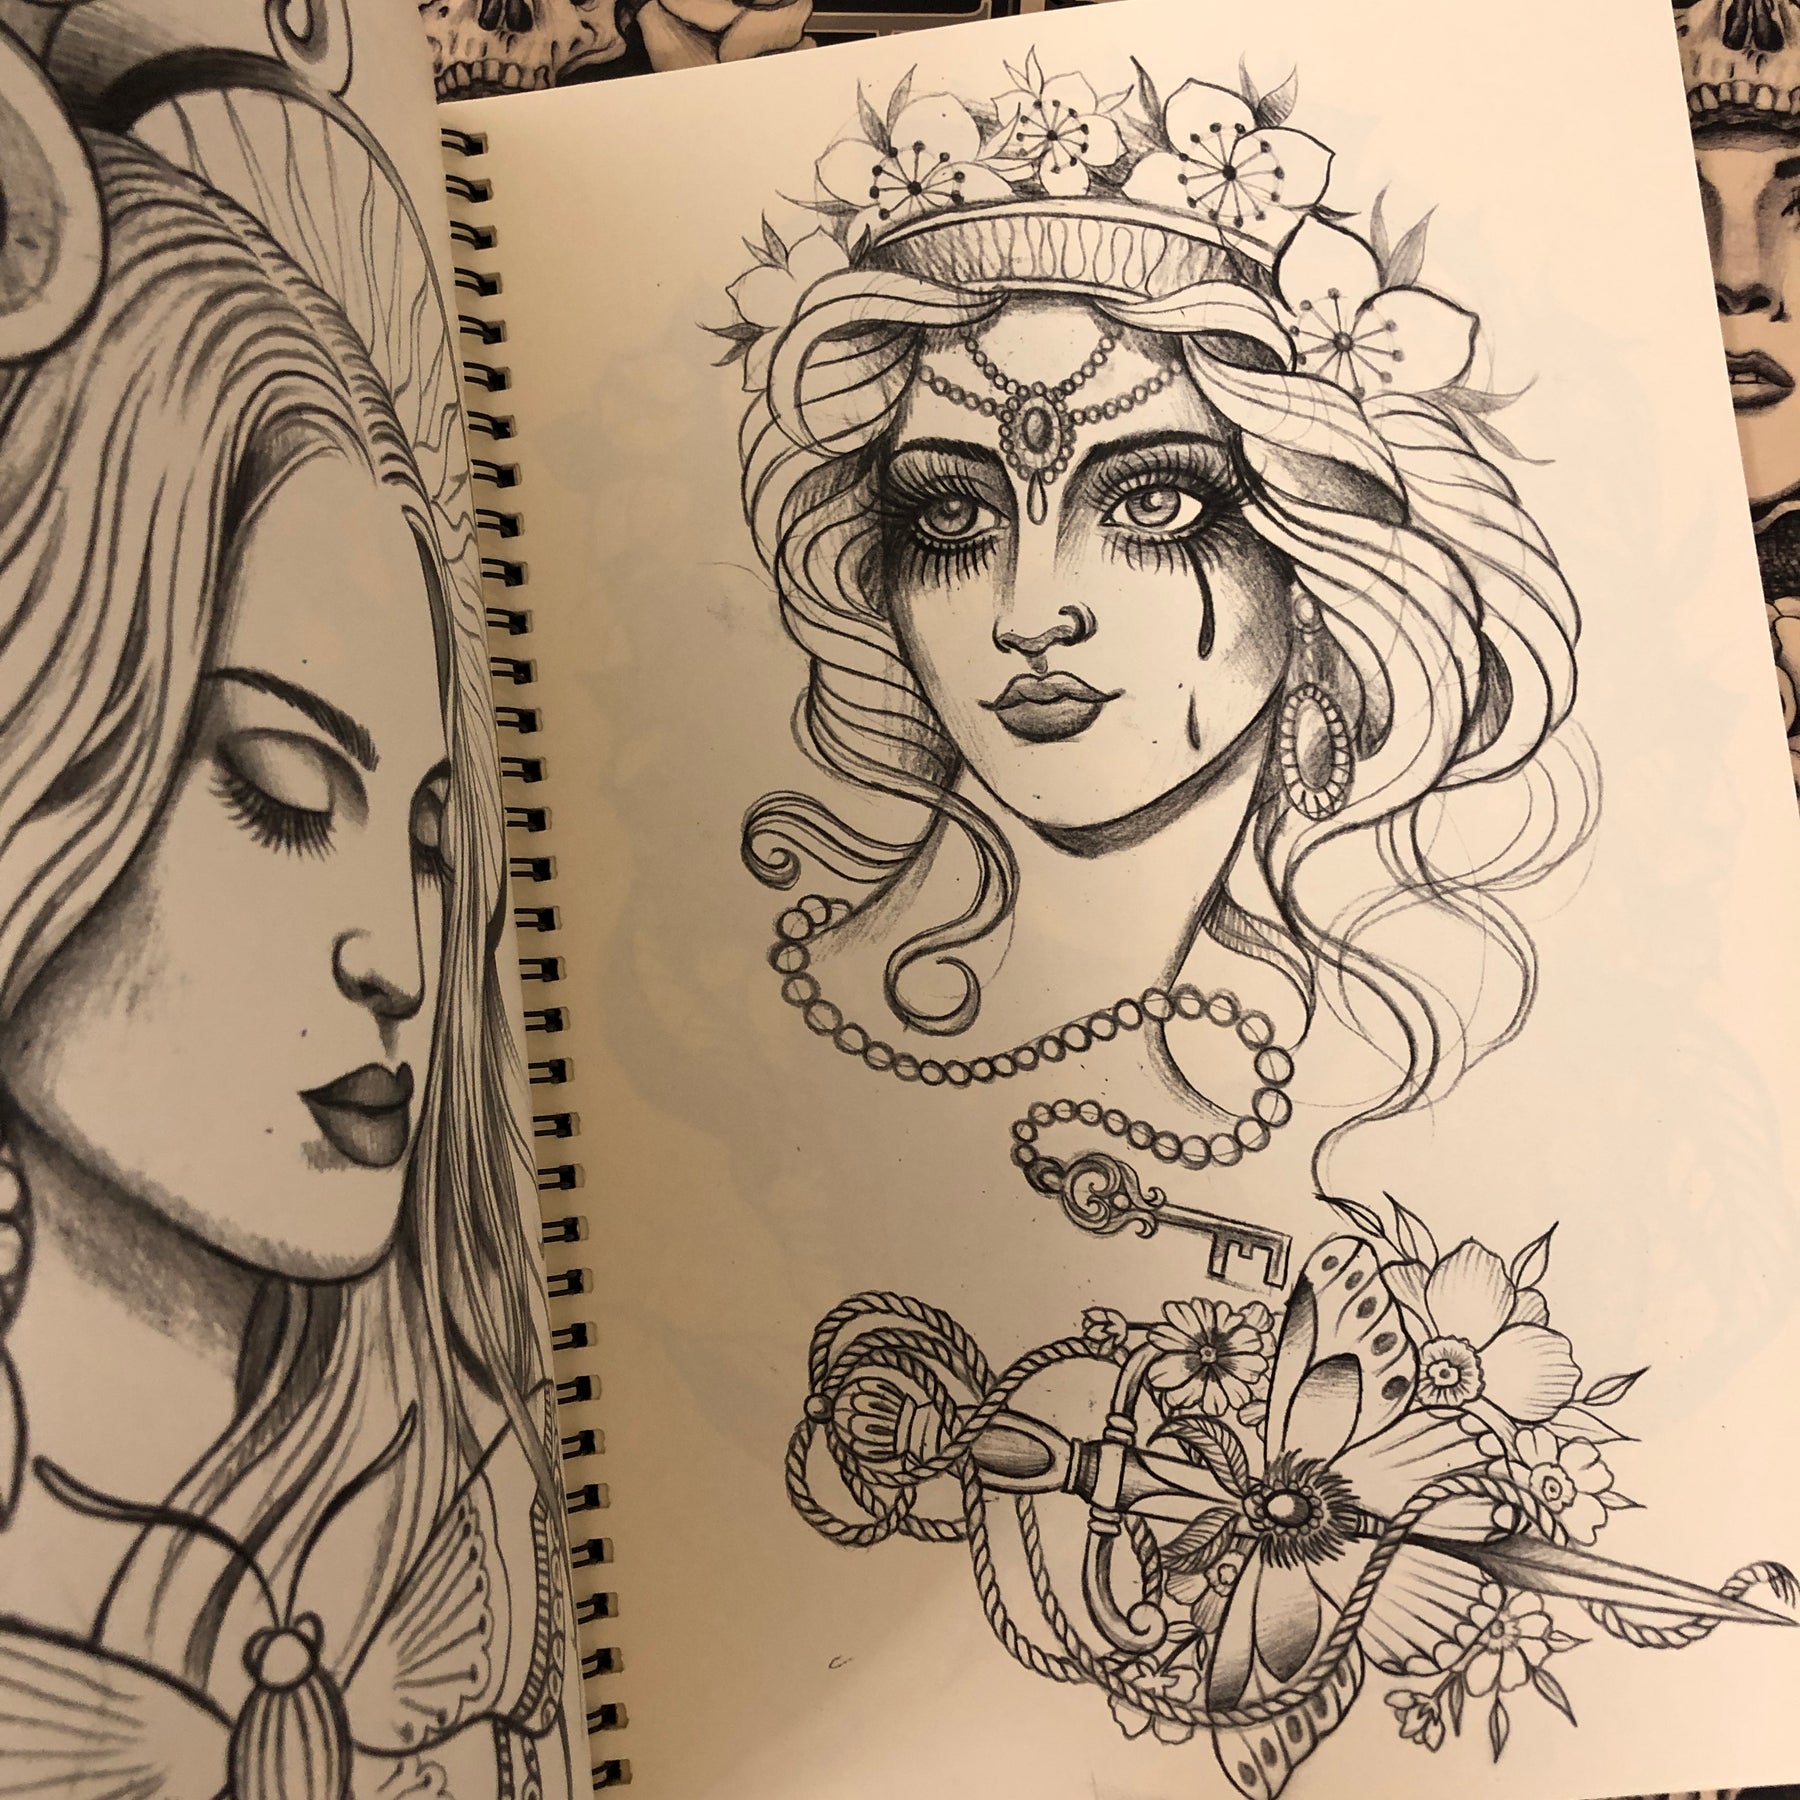 Sketchbook tour, Traditional tattoos